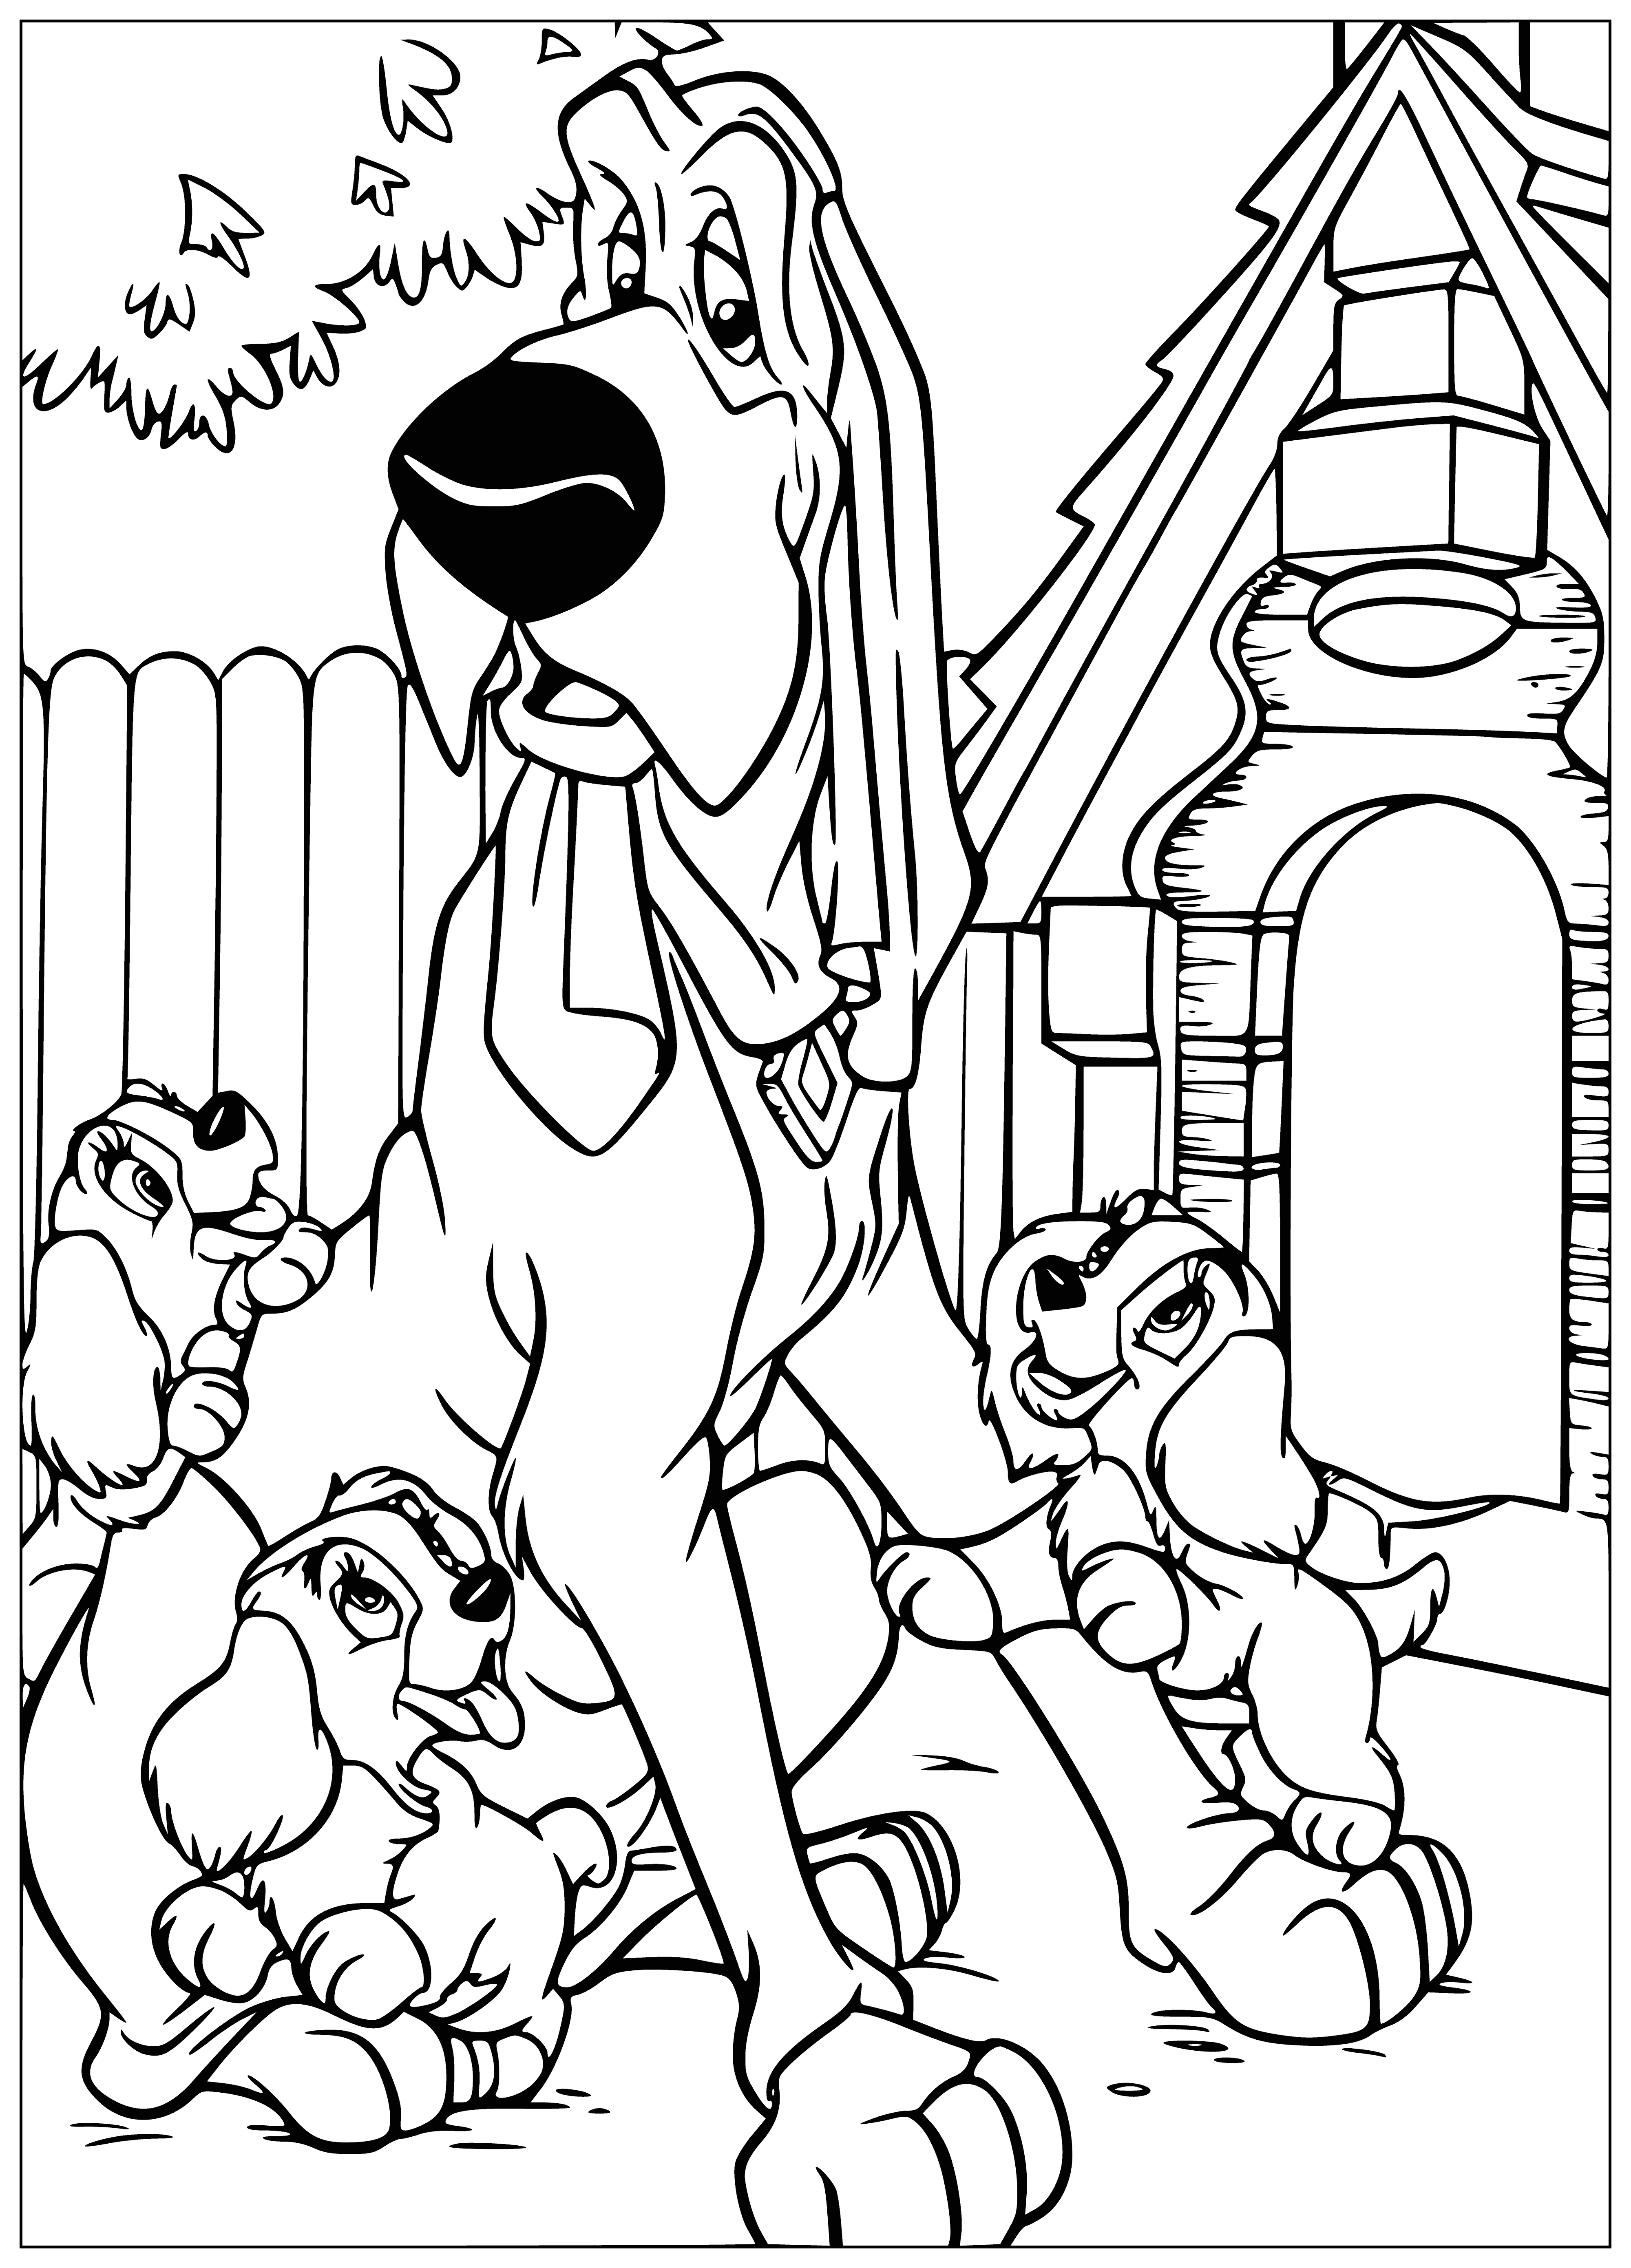 Big dog and puppies coloring page